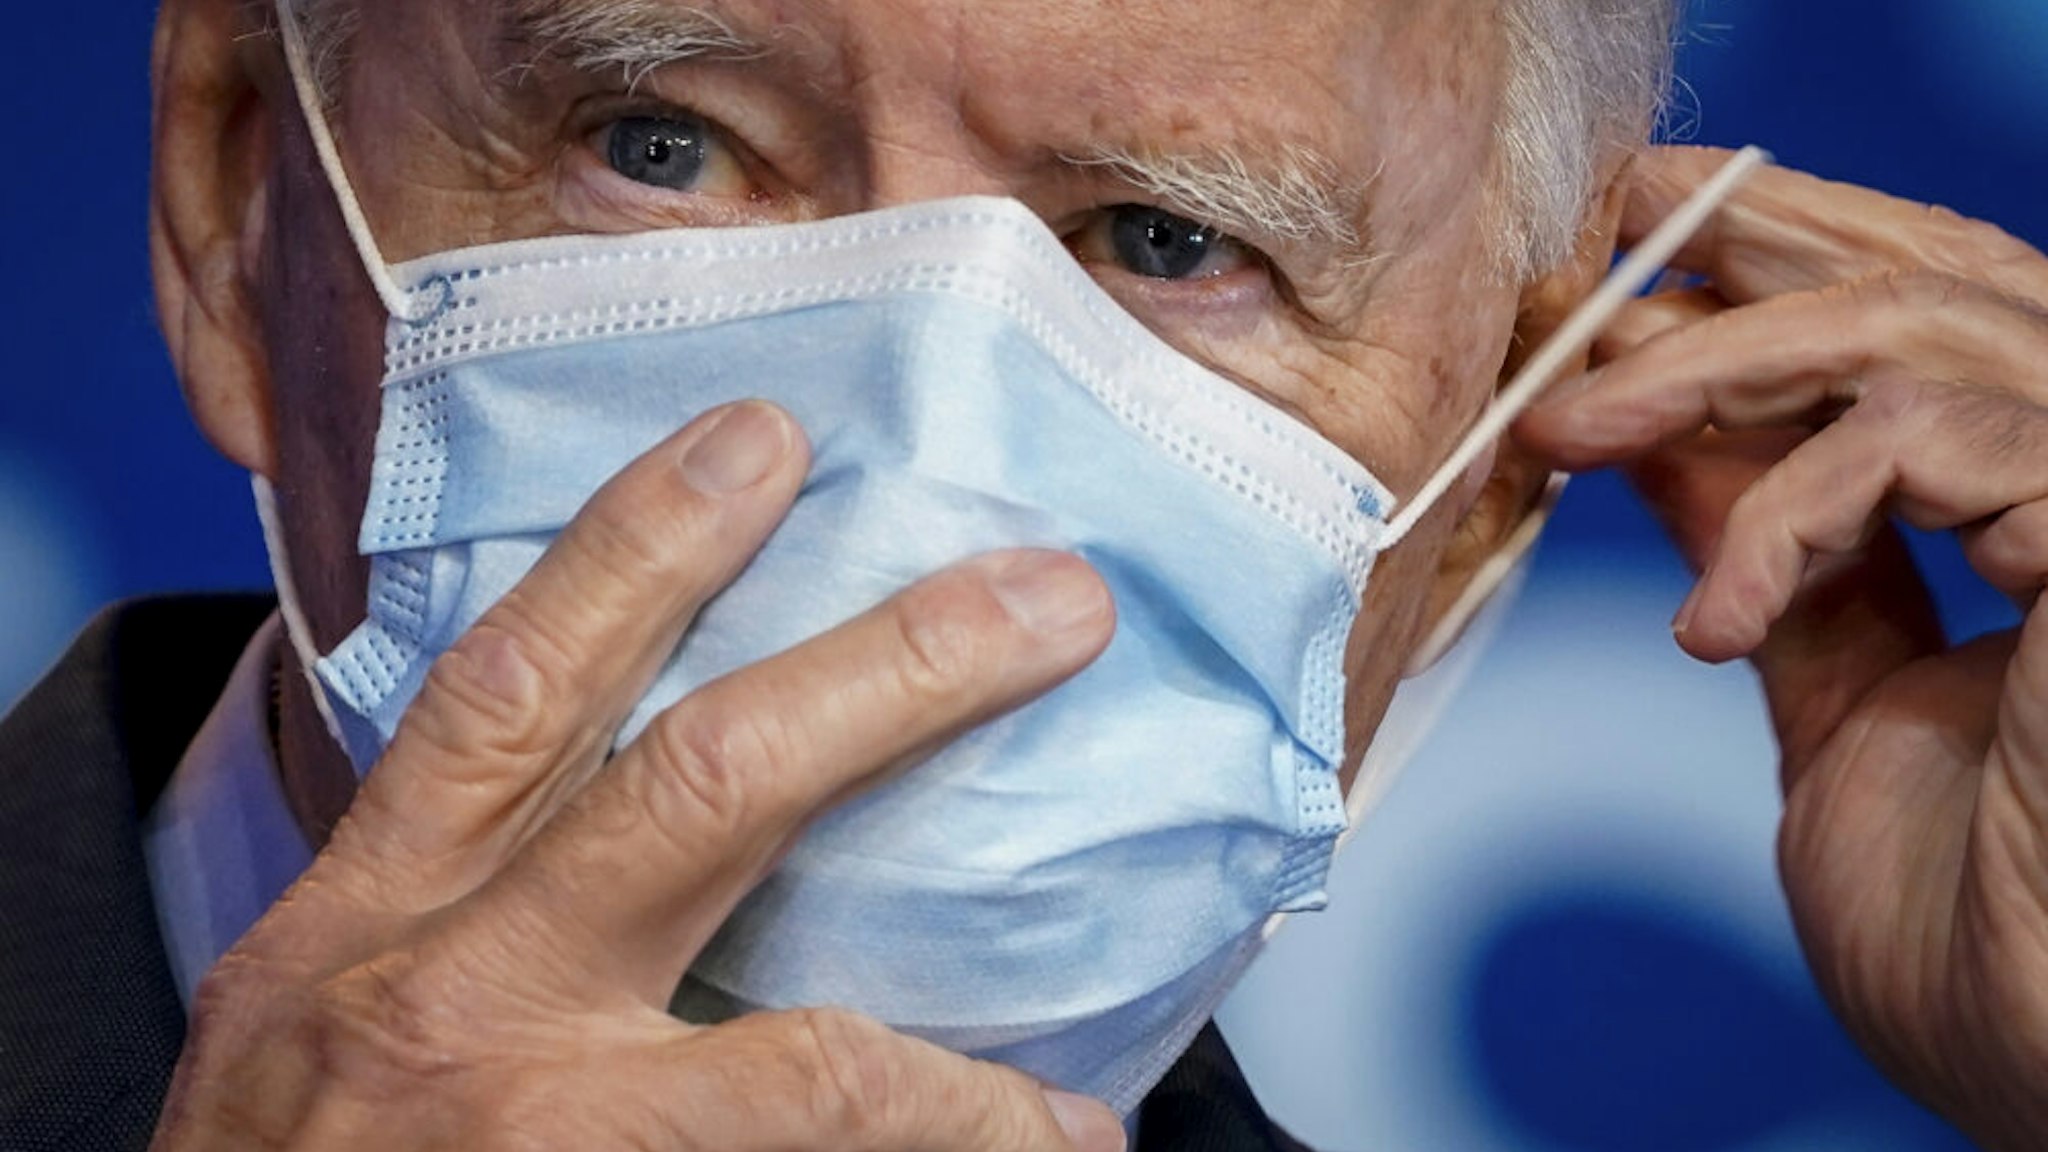 WILMINGTON, DE - OCTOBER 28: Democratic presidential nominee Joe Biden puts on his face mask after making remarks about the Affordable Care Act and COVID-19 after attending a virtual coronavirus briefing with medical experts at The Queen theater on October 28, 2020 in Wilmington, Delaware. Participants in the briefing include former U.S. Surgeon General Dr. Vivek Murthy, Director for Science in the Public Interest Dr. David Kessler, New York University professor Dr. Celine Grounder, and Yale University professor of medicine Dr. Marcella Nunez-Smith.